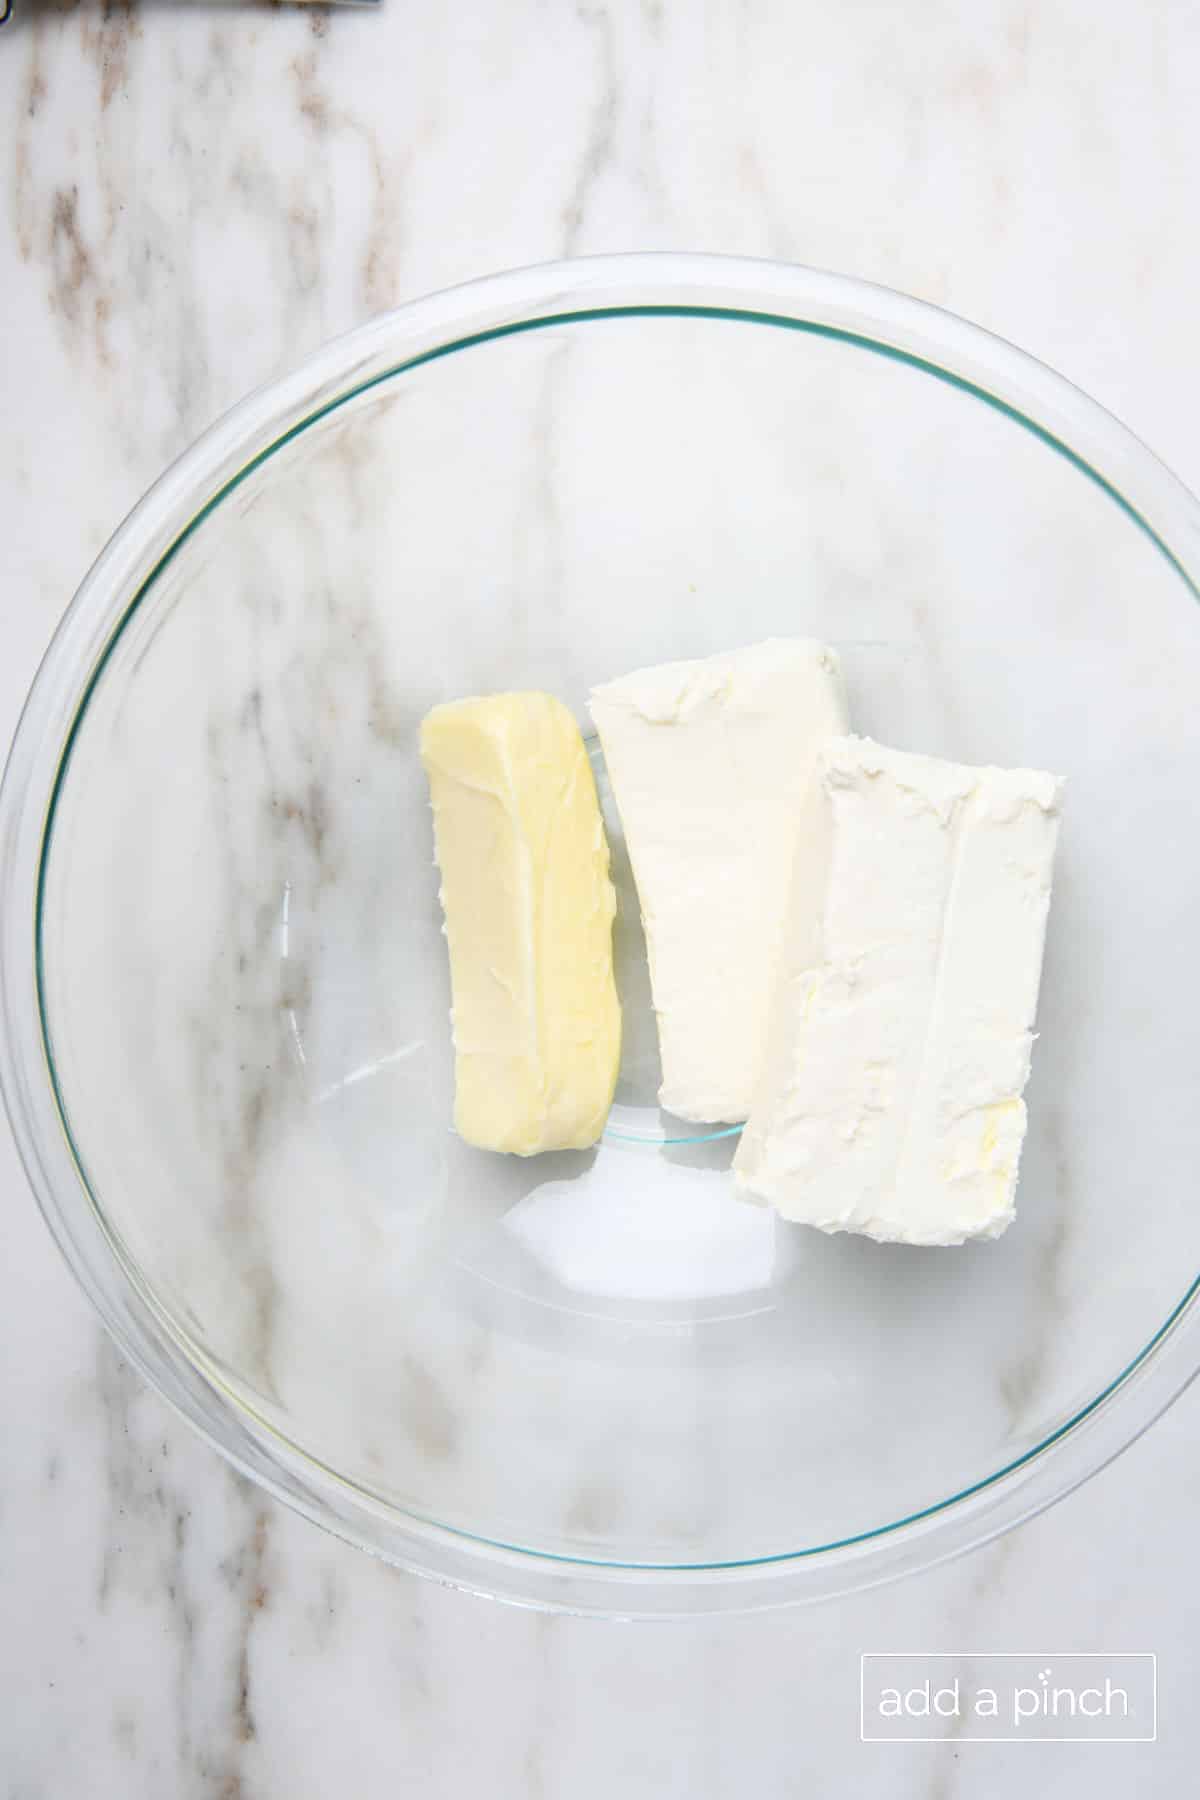 Two softened blocks of cream cheese and softened butter in a glass mixing bowl on marble countertop.